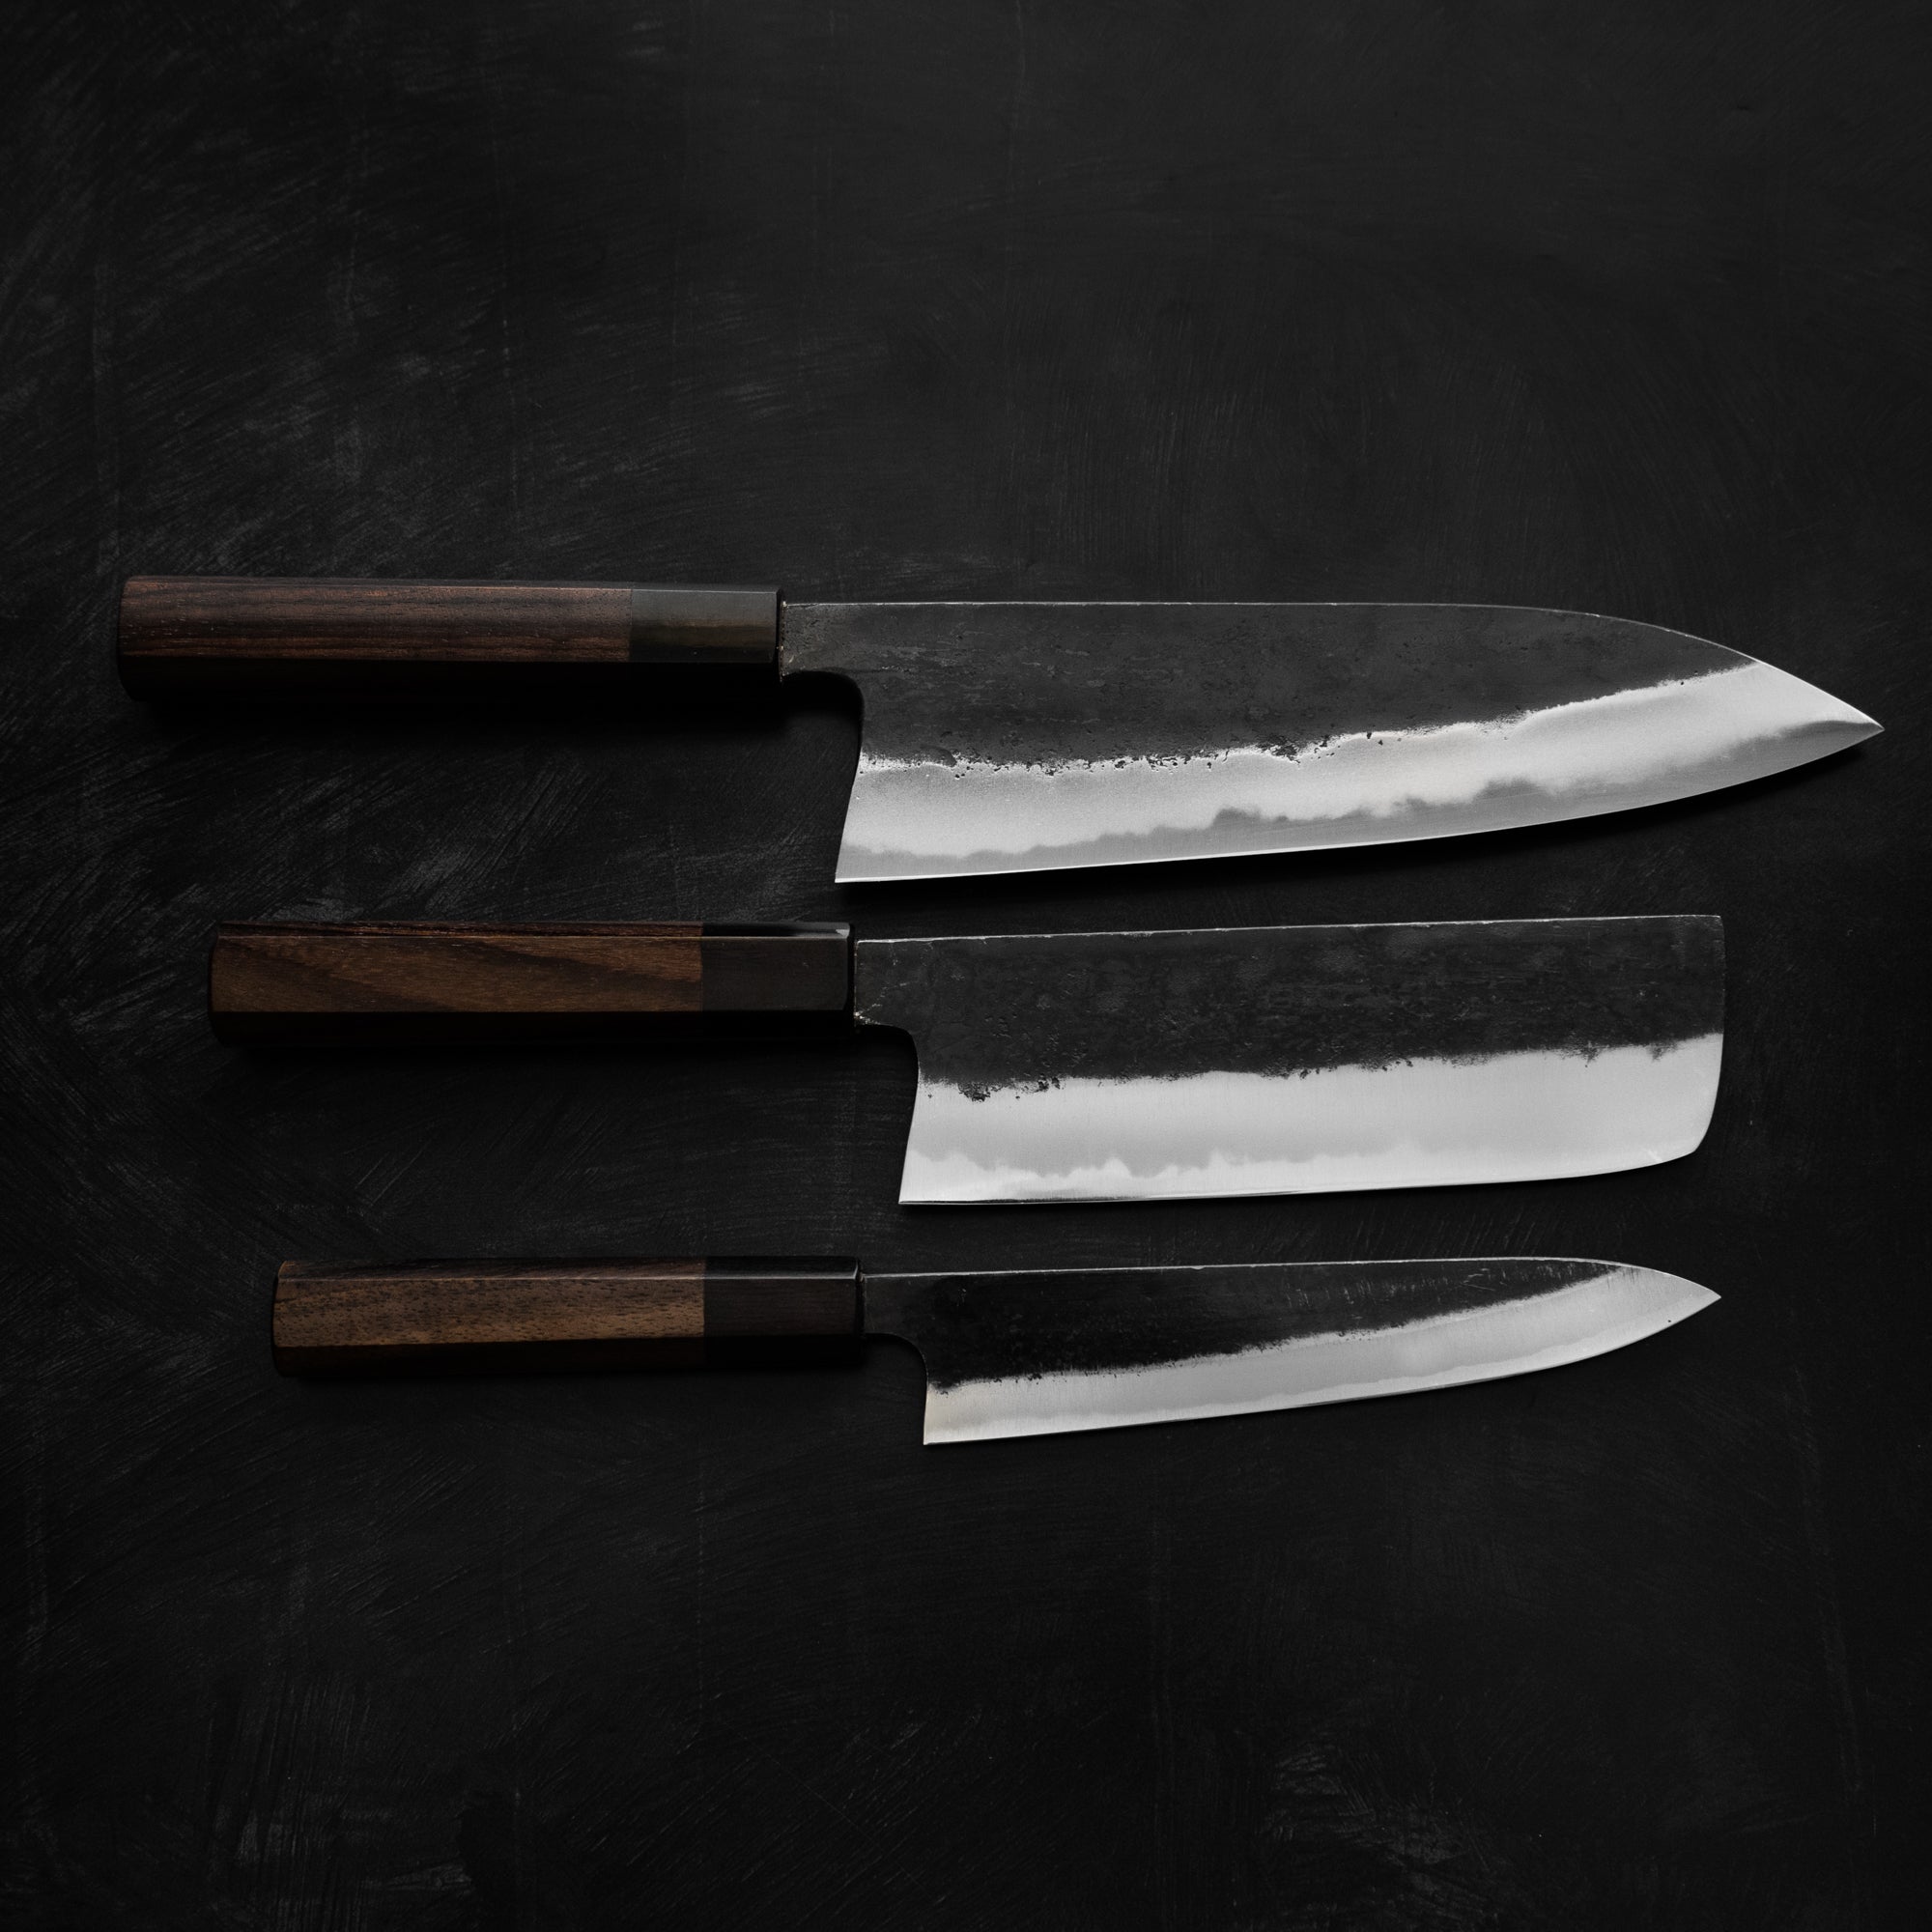 What do people mean when they say high-performance kitchen knives?